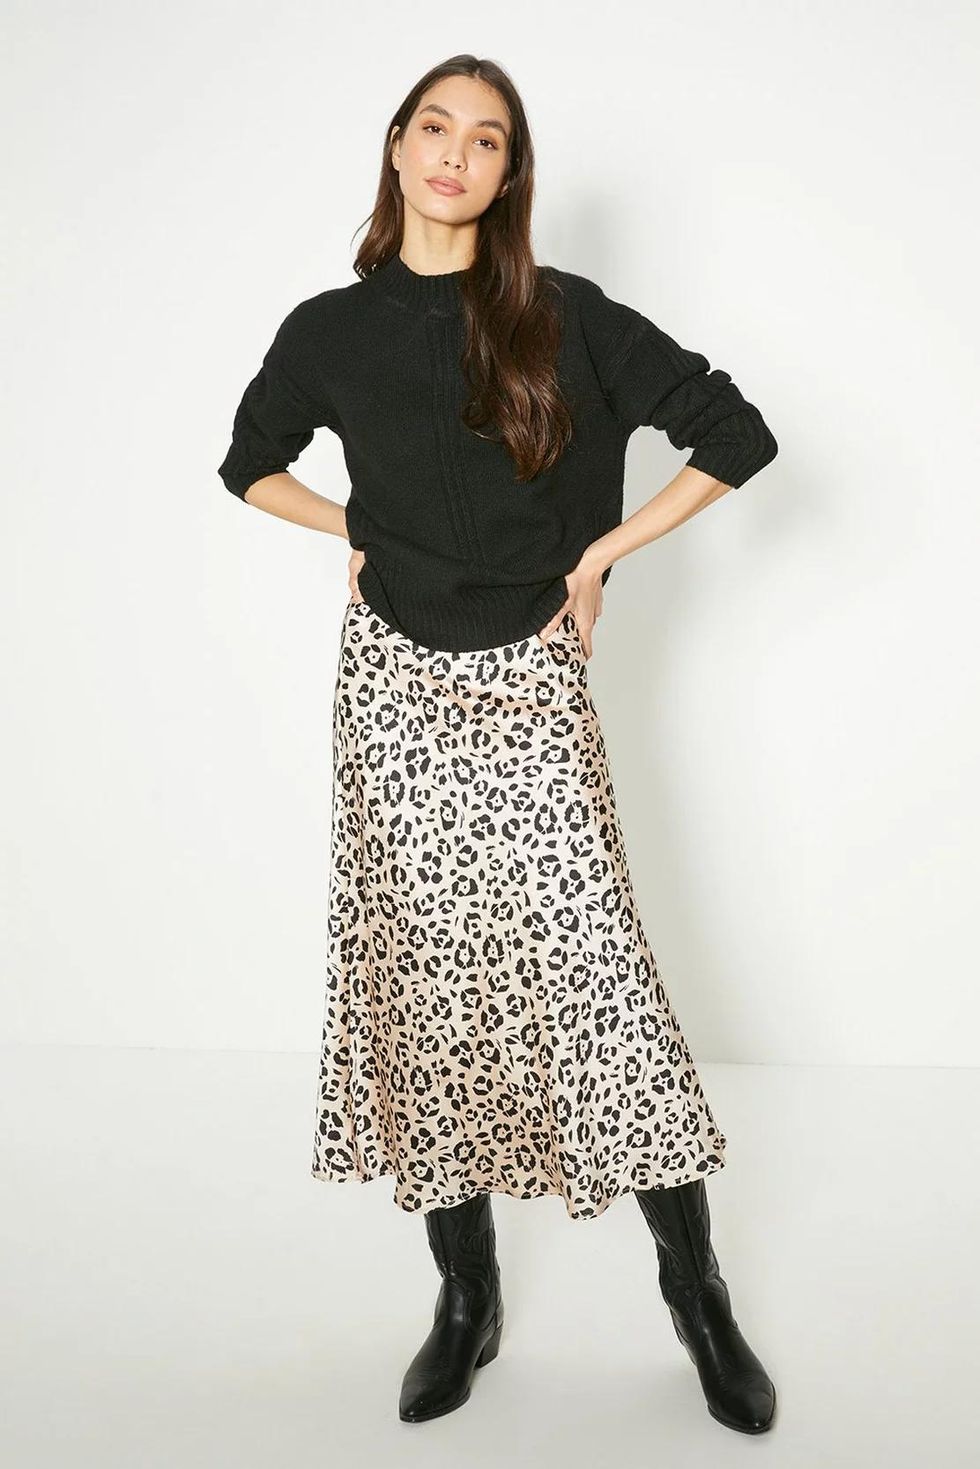 Trinny Woodall is chic in leopard print look